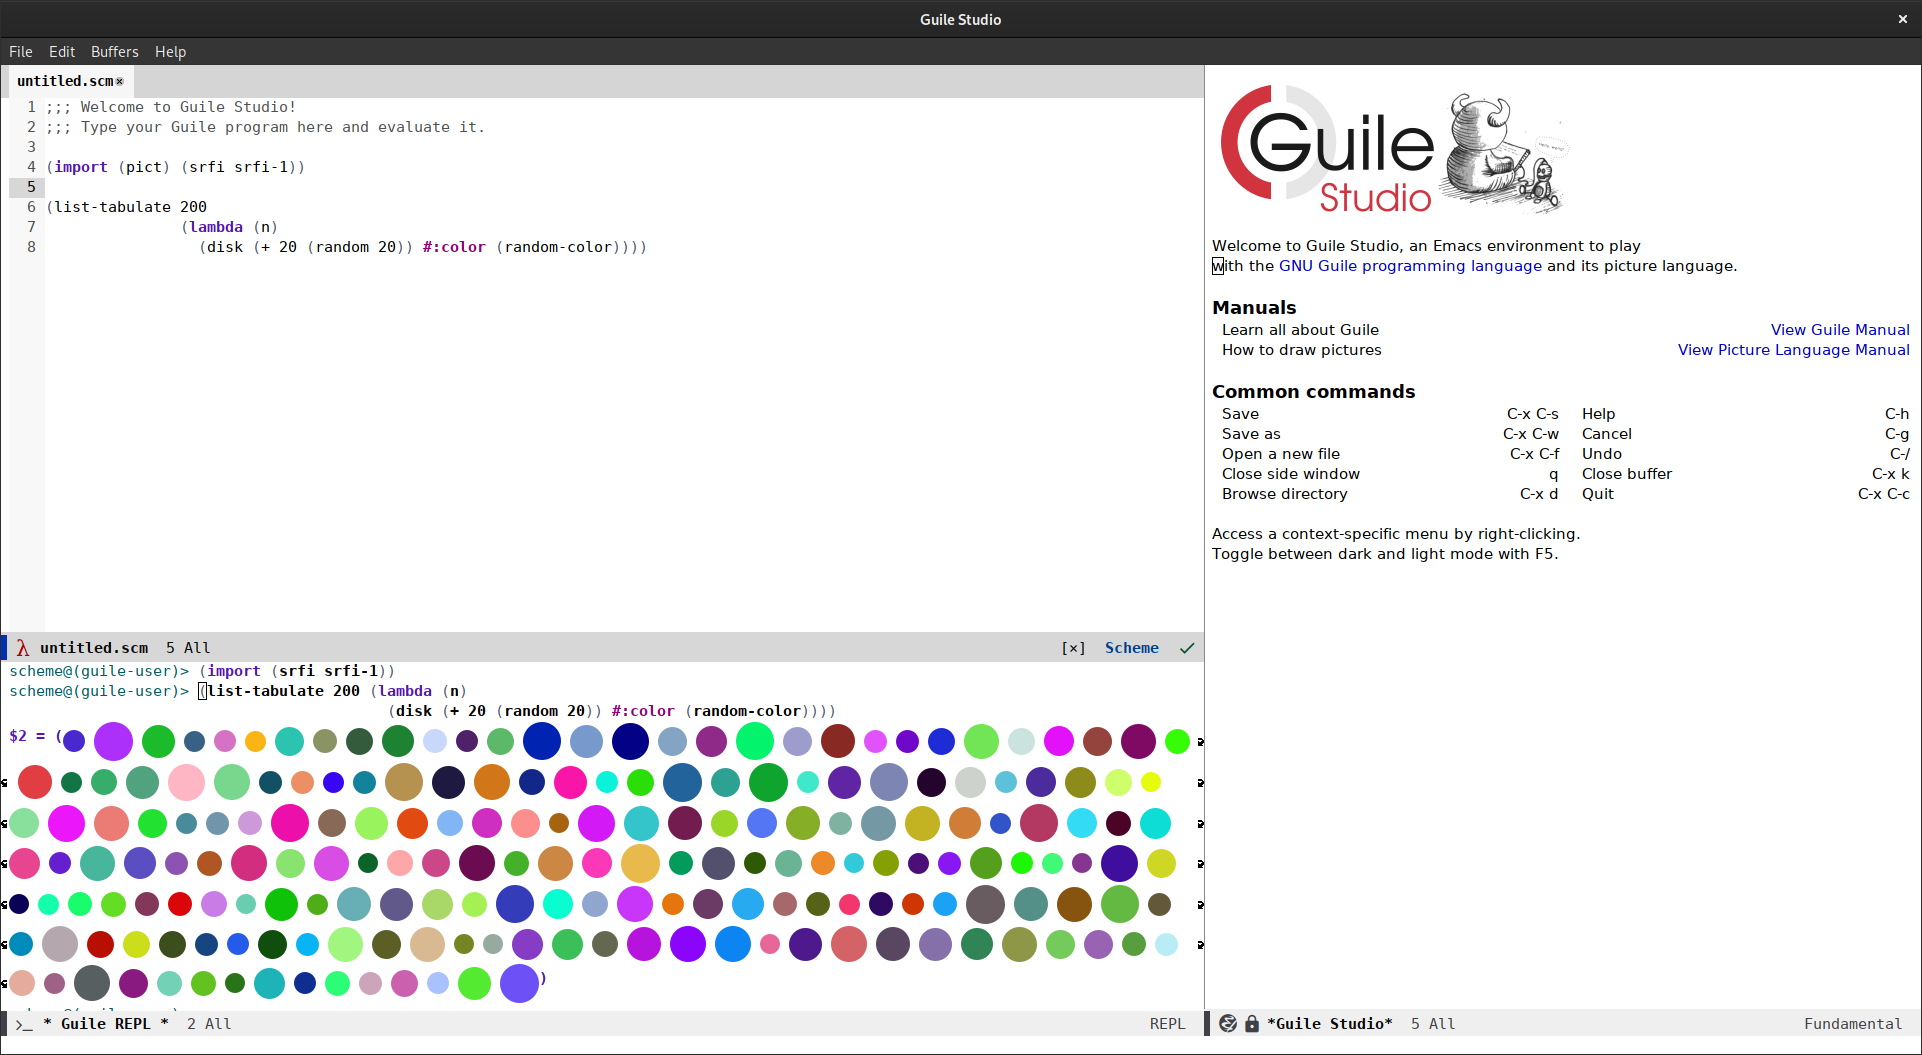 A screenshot of Guile Studio with a custom splash screen,
a code buffer, and a REPL session showing the picture language.